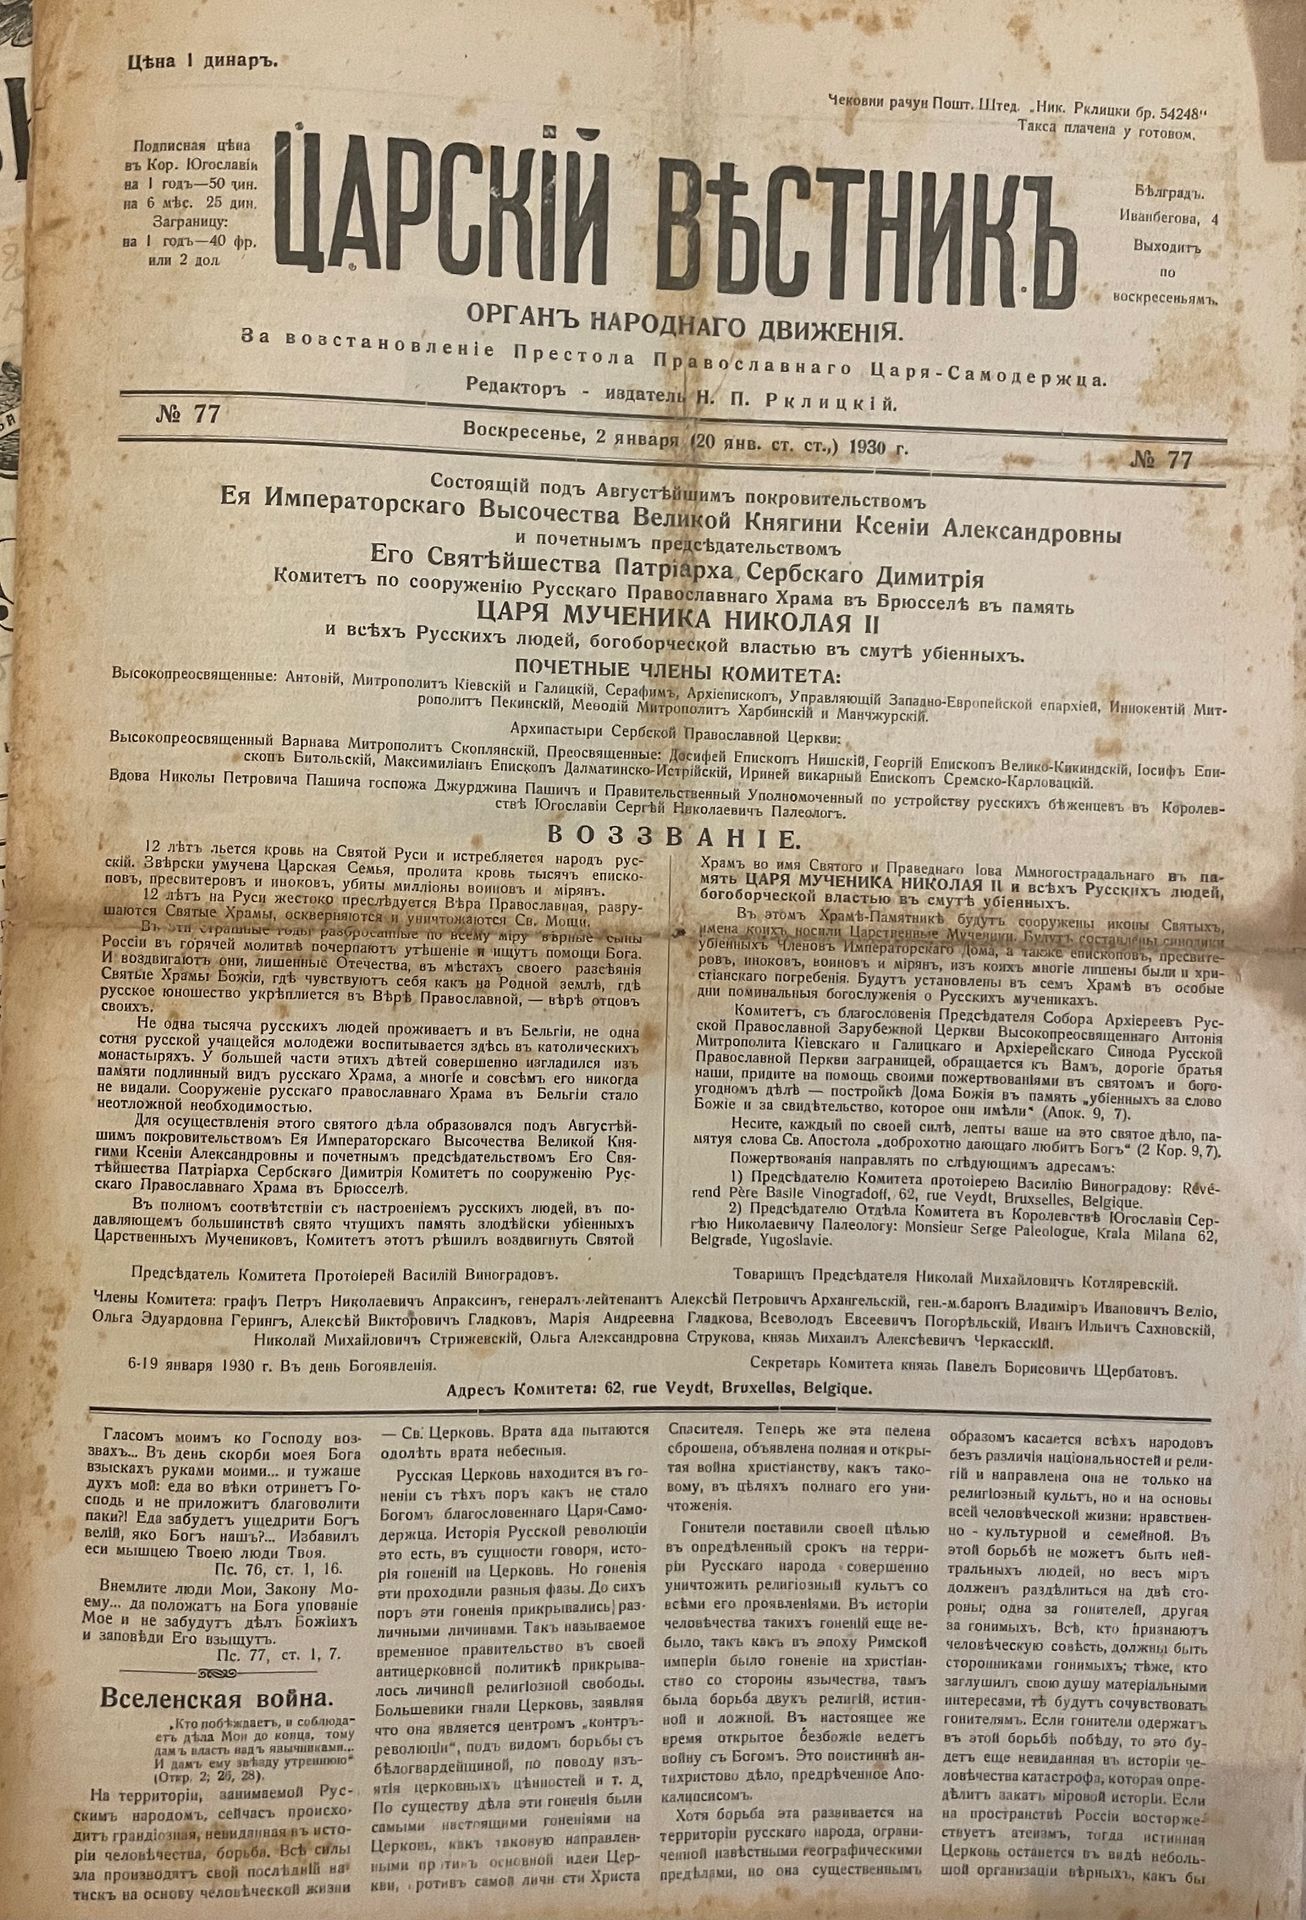 Null PATRIOTIC JOURNALS of the Russian emigration.

Newspaper "Tsar's Messenger"&hellip;